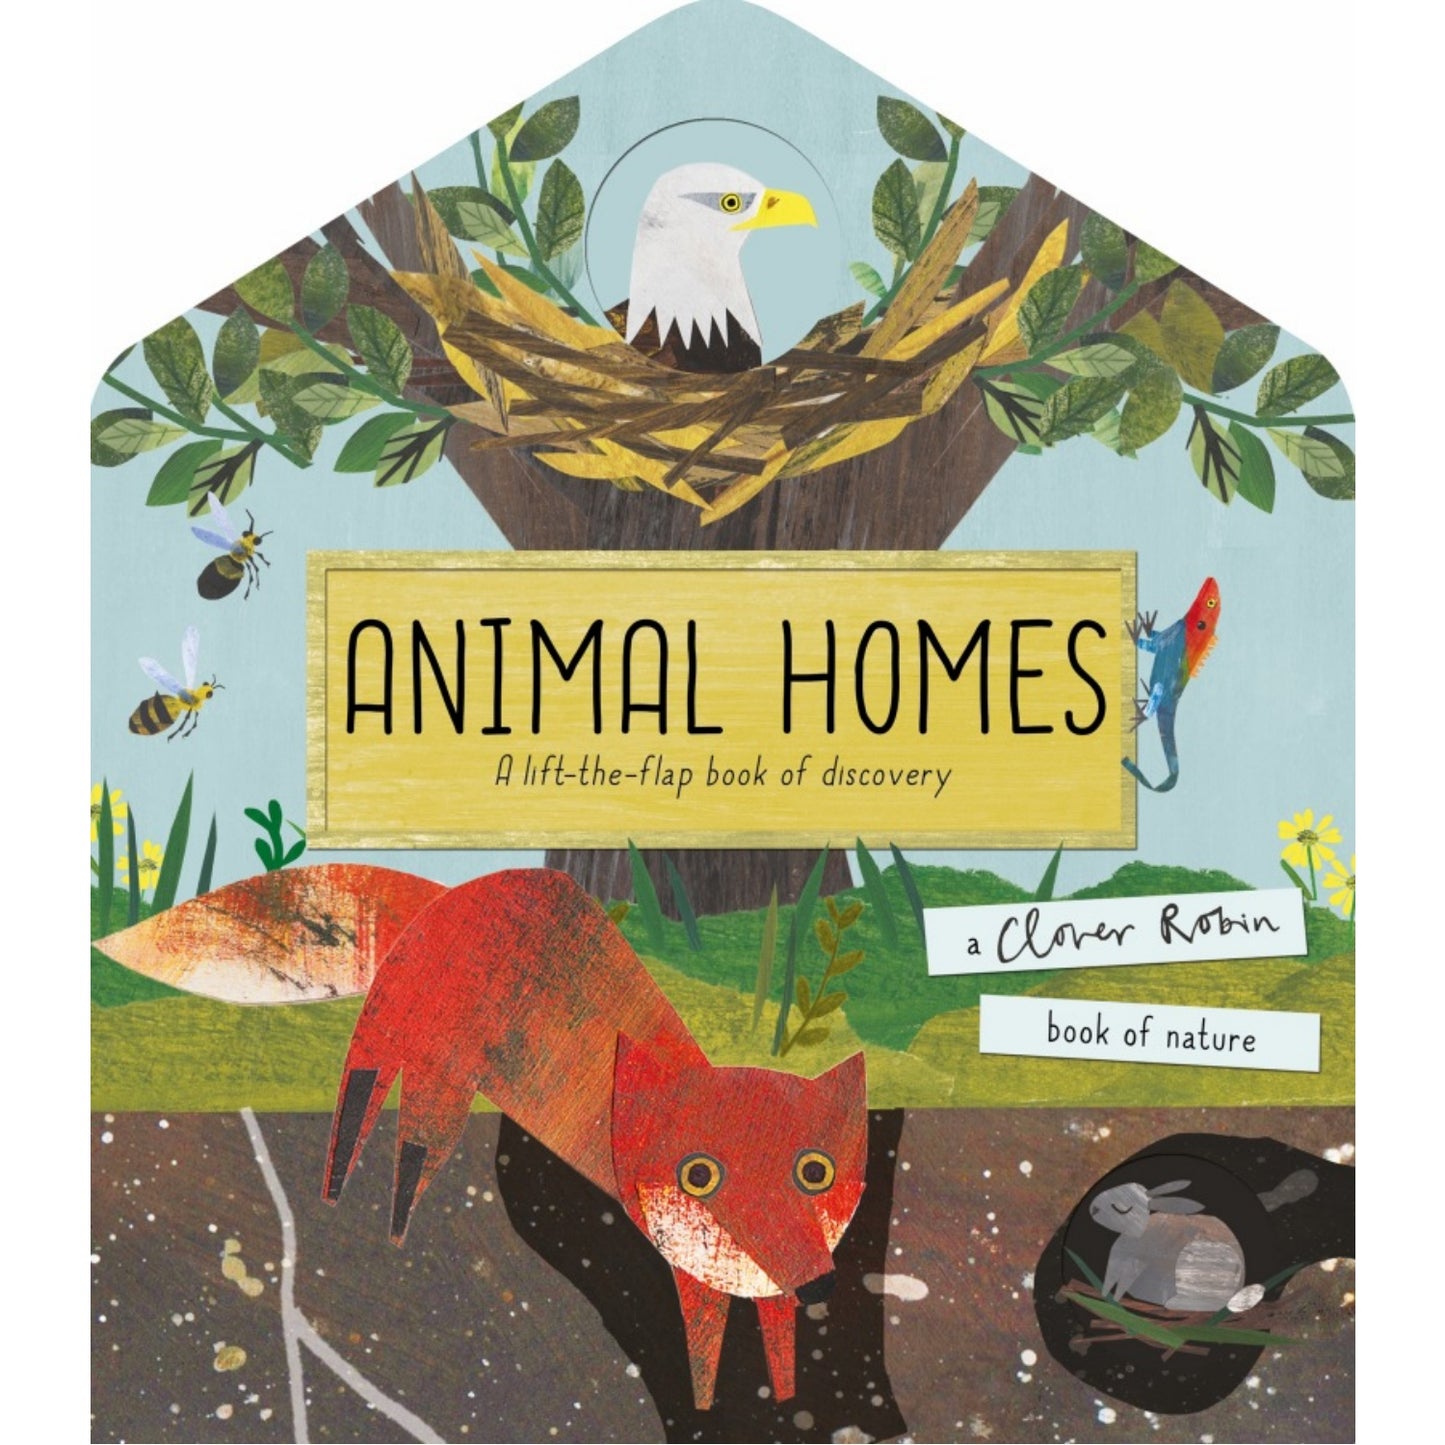 Animal Homes: A Clover Robin Book of Nature | Children's Lift-the-Flap Board Book